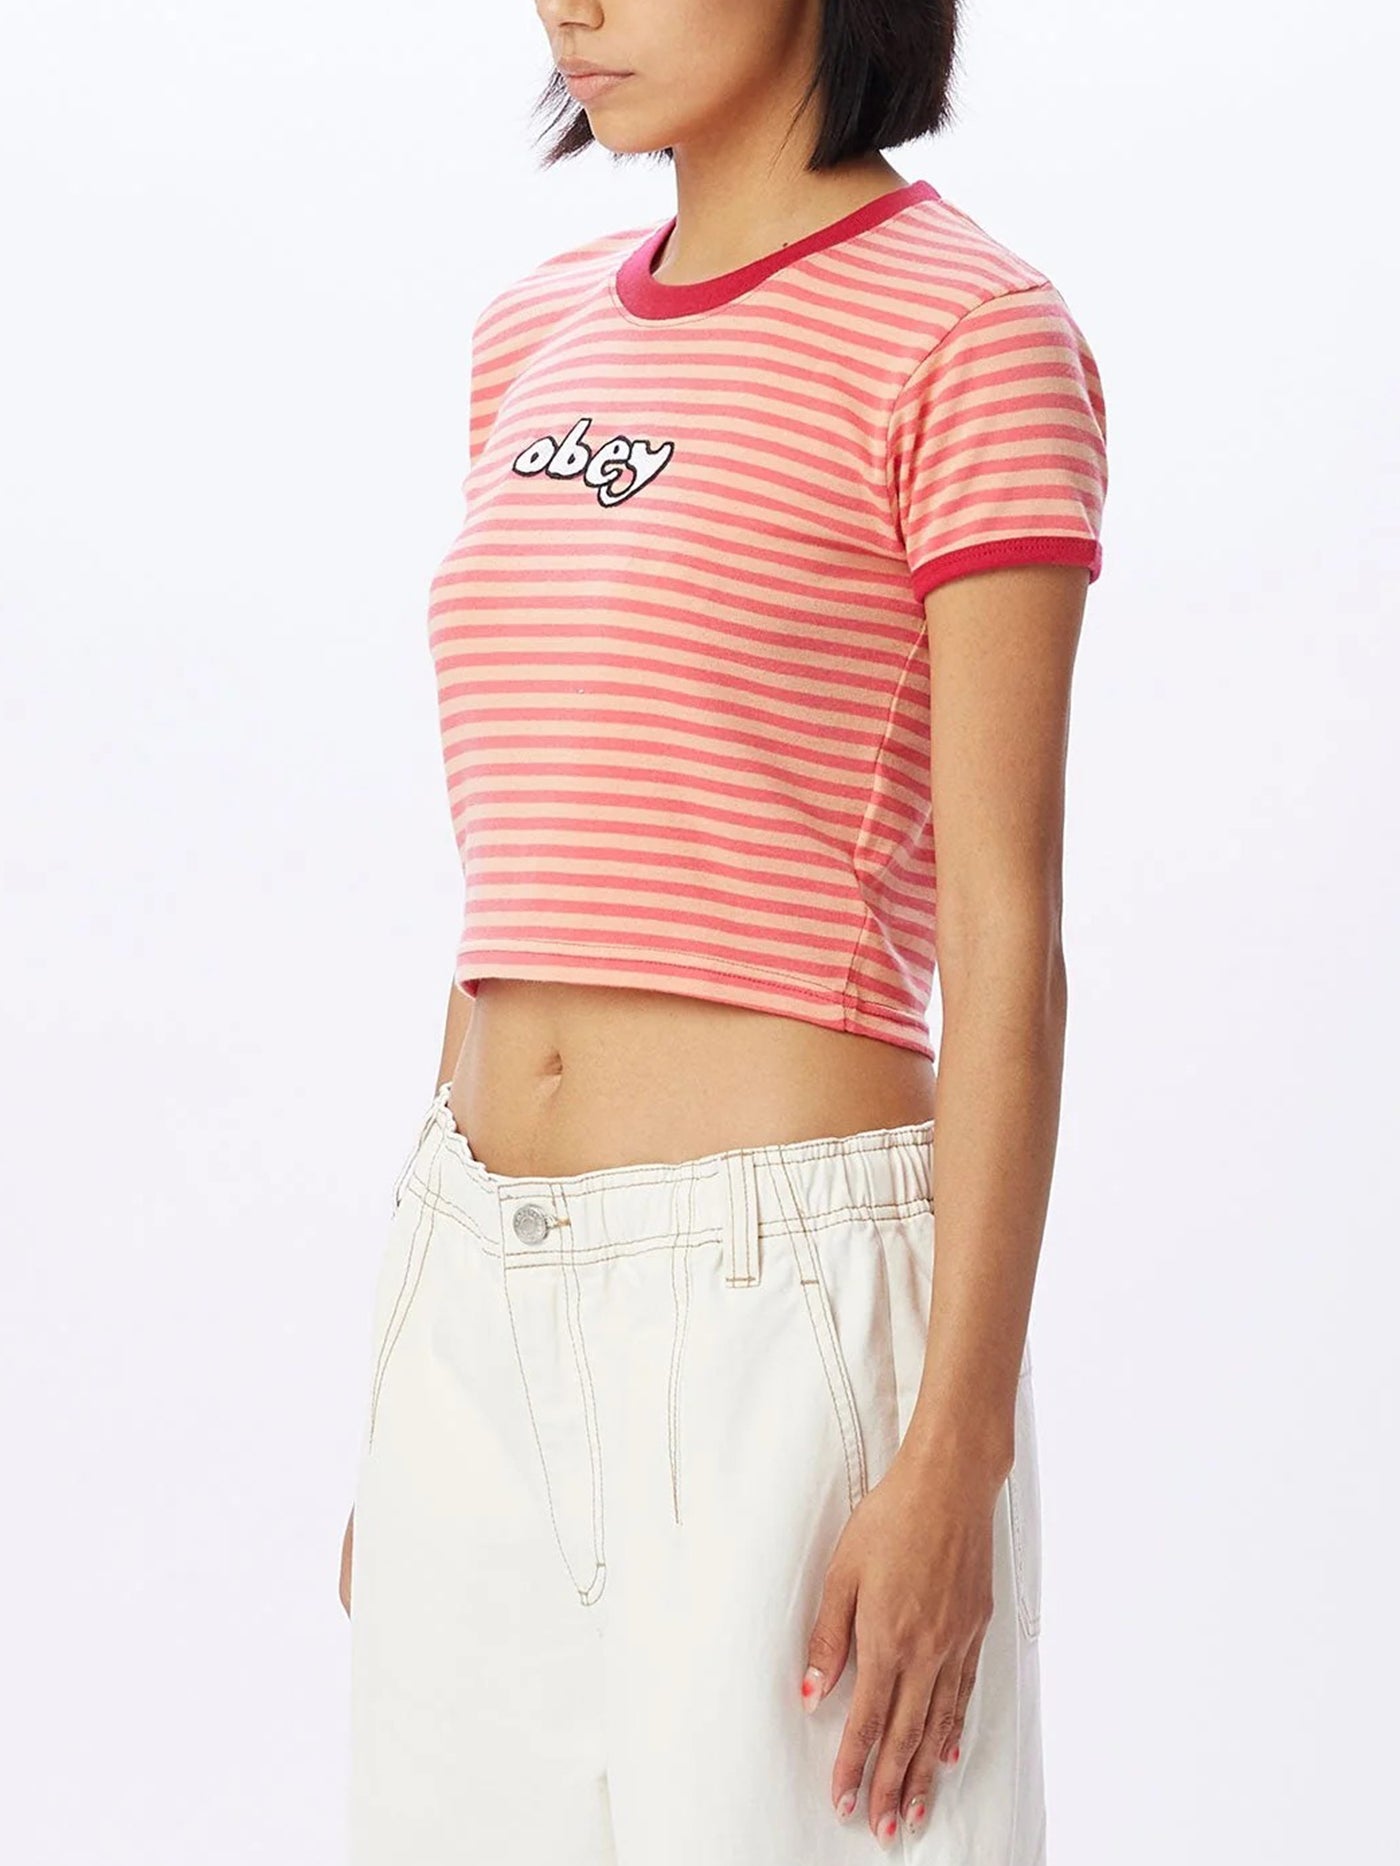 Obey Spring 2023 Zoe T-Shirt